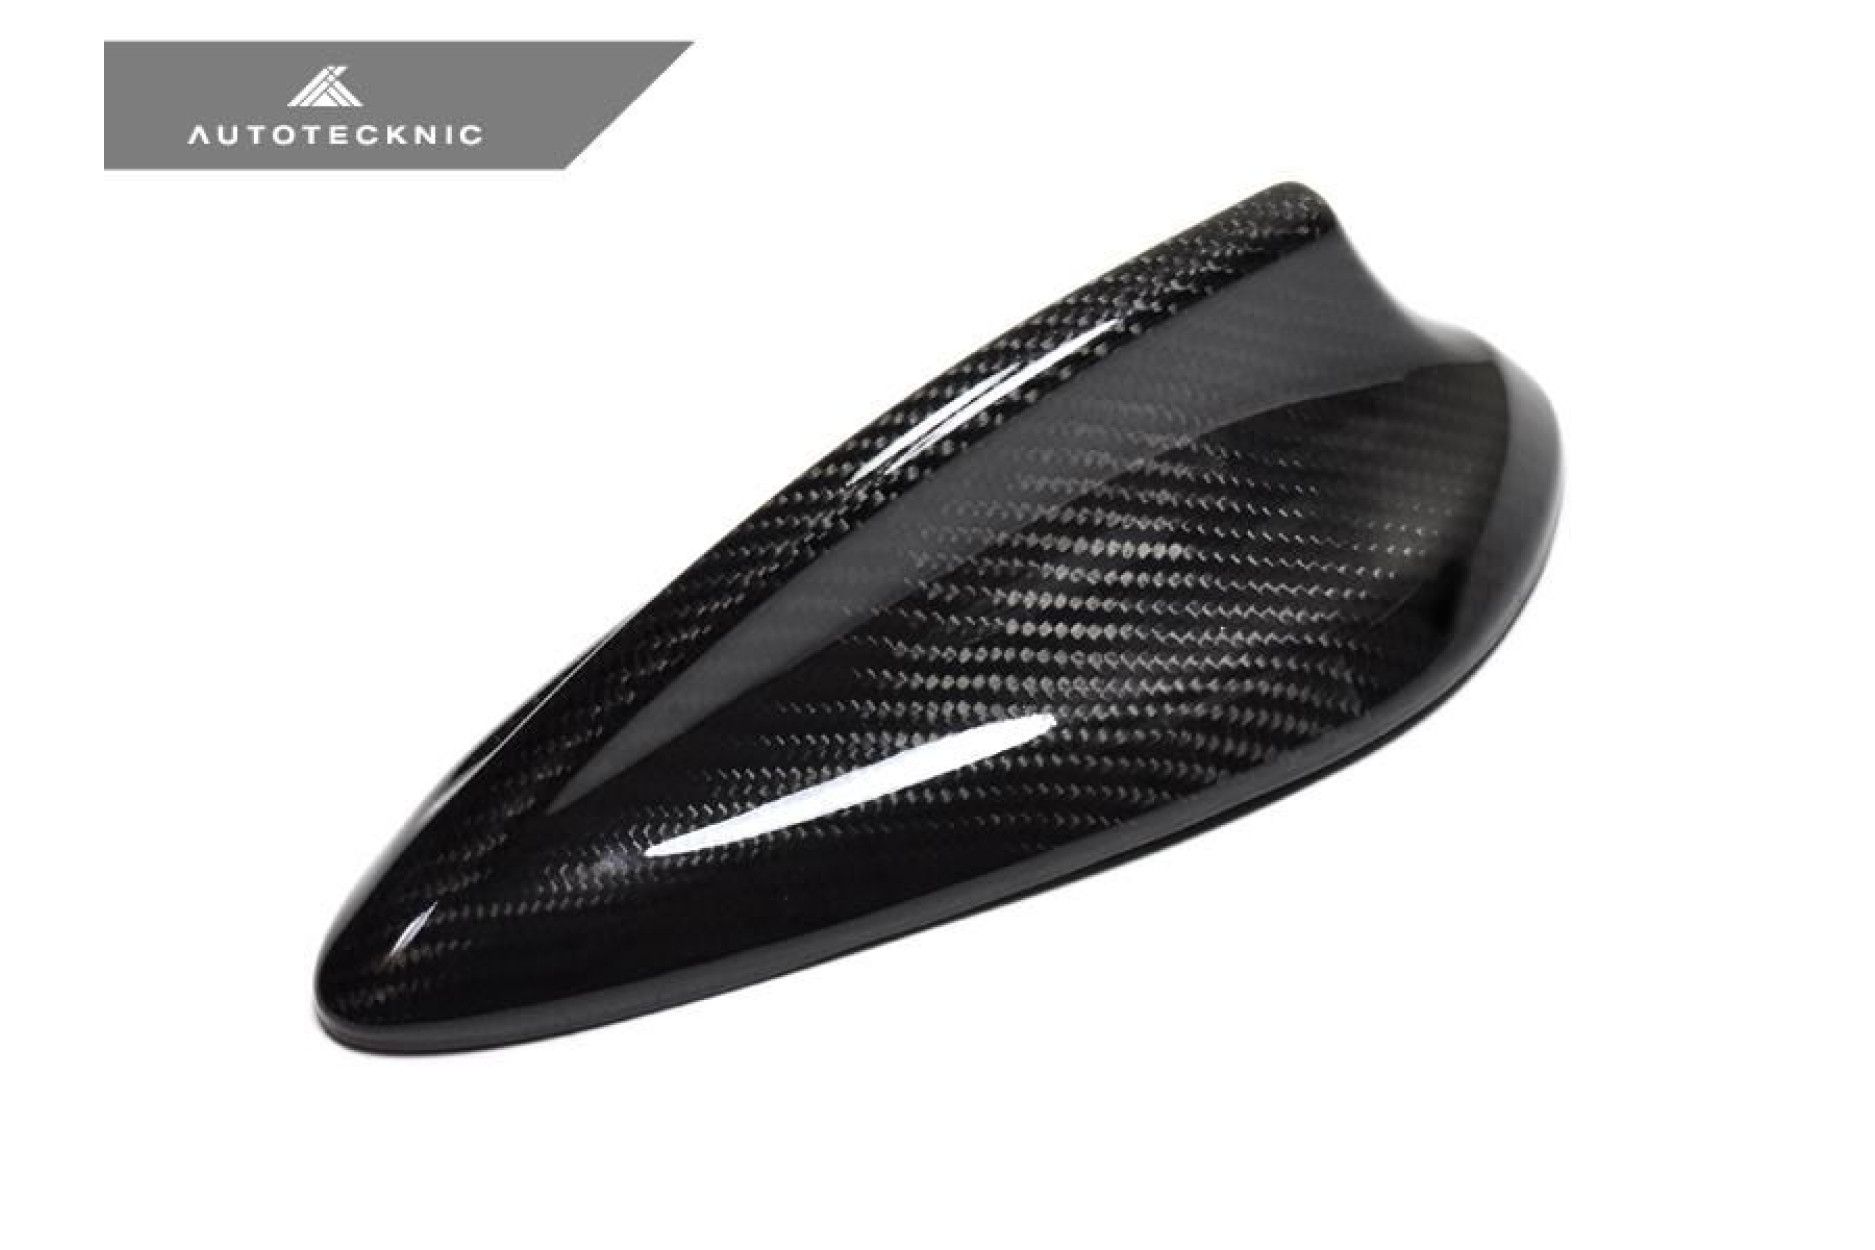 Get that predator look on your BMW with the AutoTecknic vacuumed dry carbon fiber 'shark fin' antenna cover. Made with AutoTecknic's signature vacuum forming technology, our products offer perfect fit